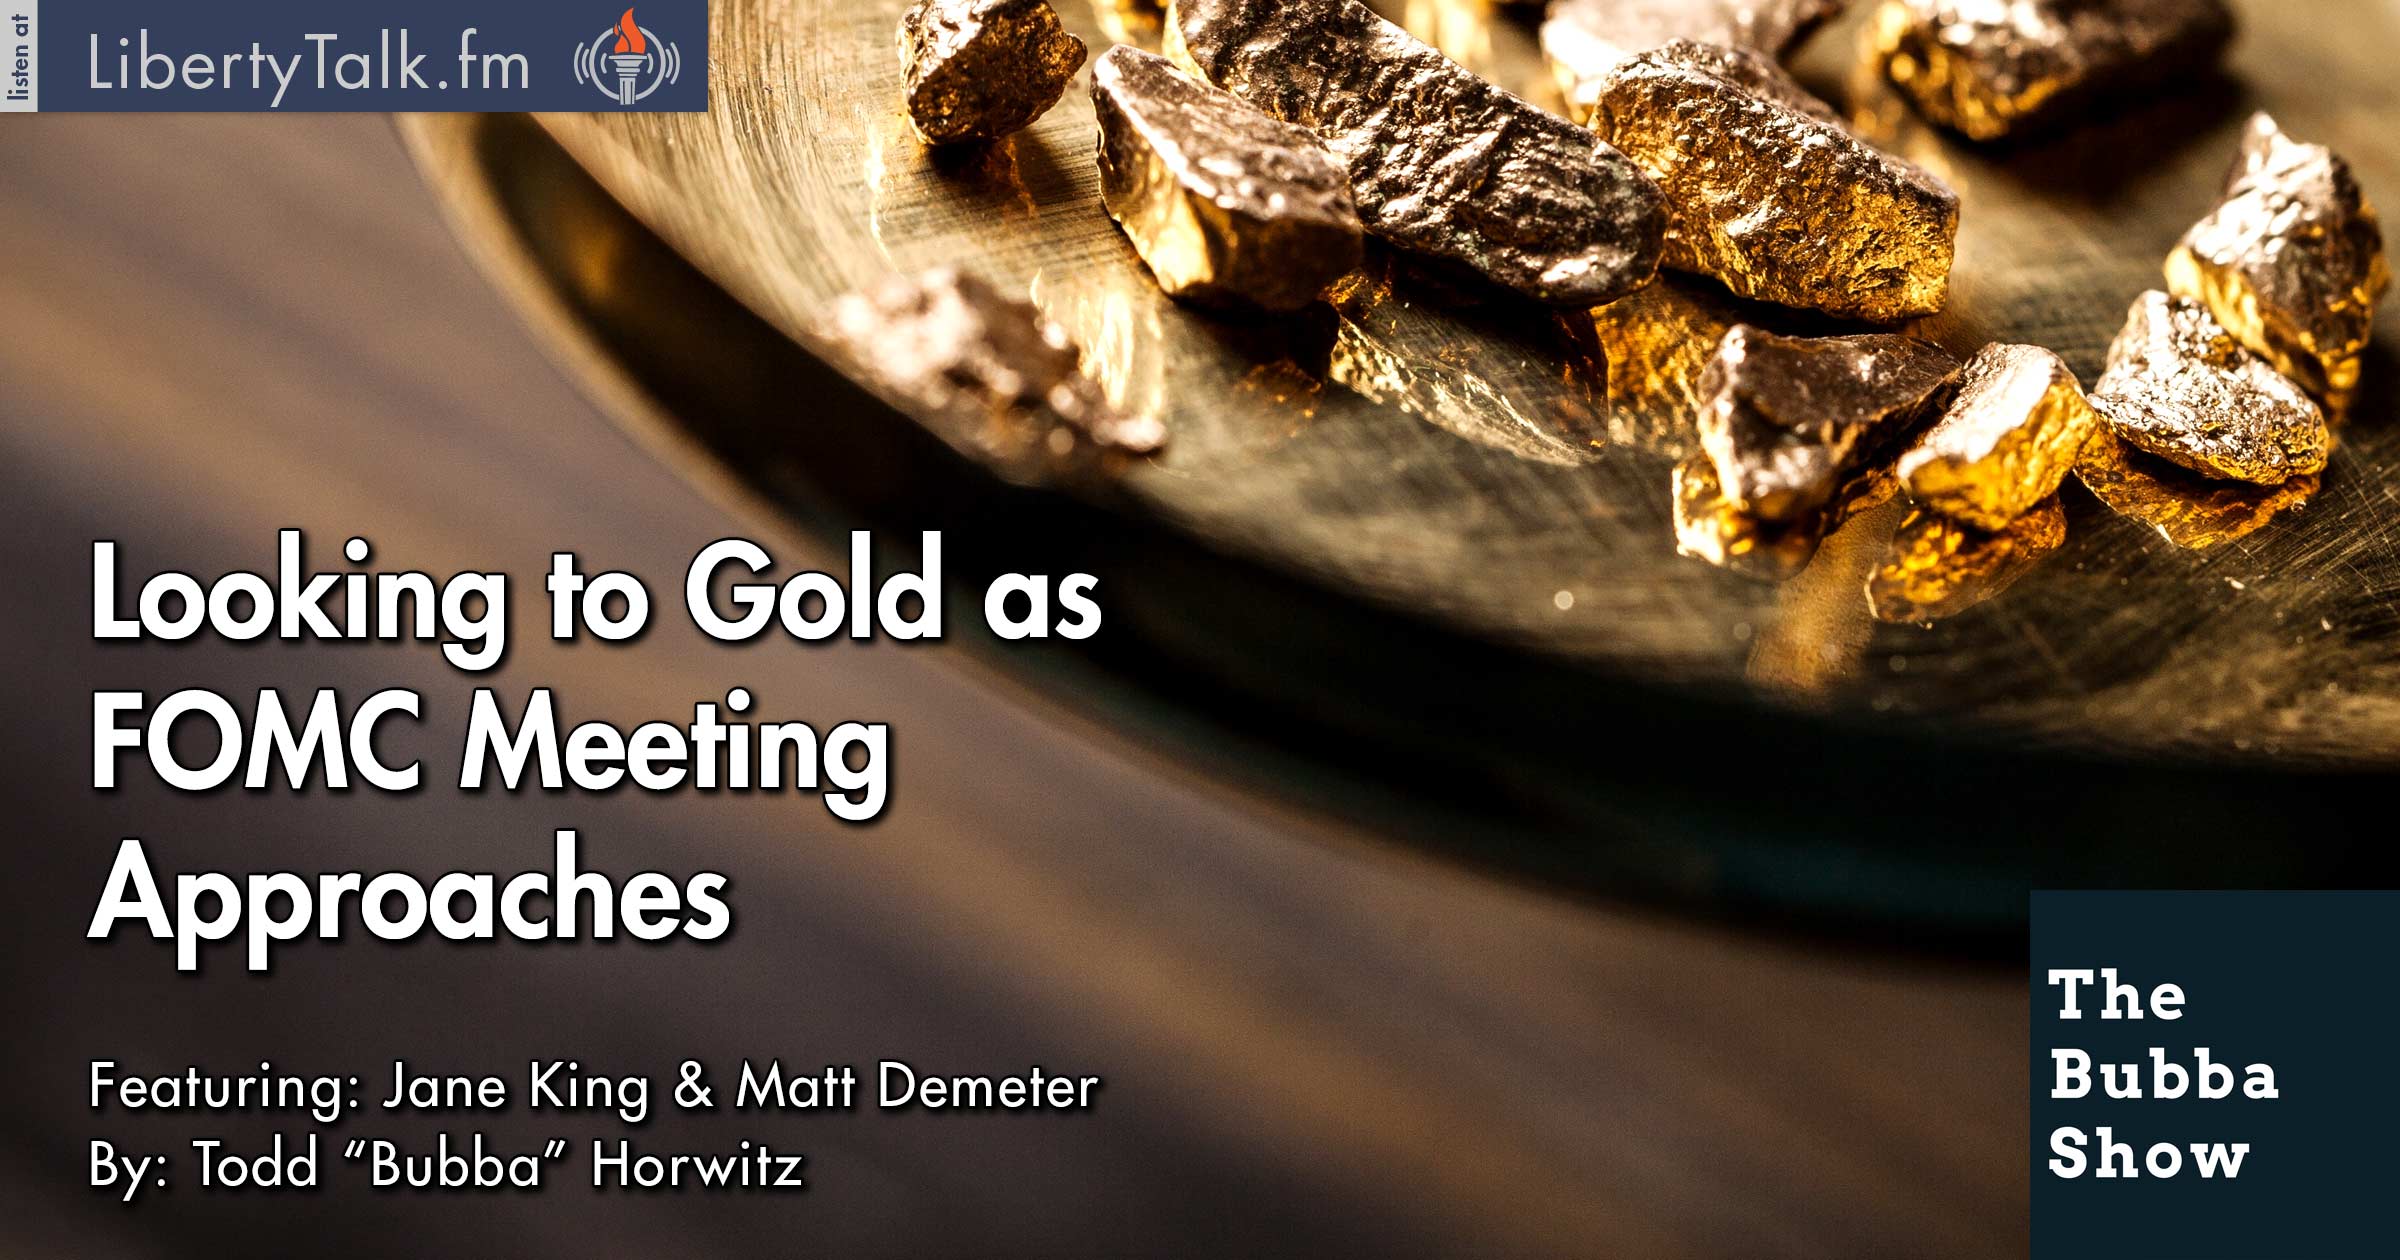 Looking to Gold as FOMC Meeting Approaches - The Bubba Show